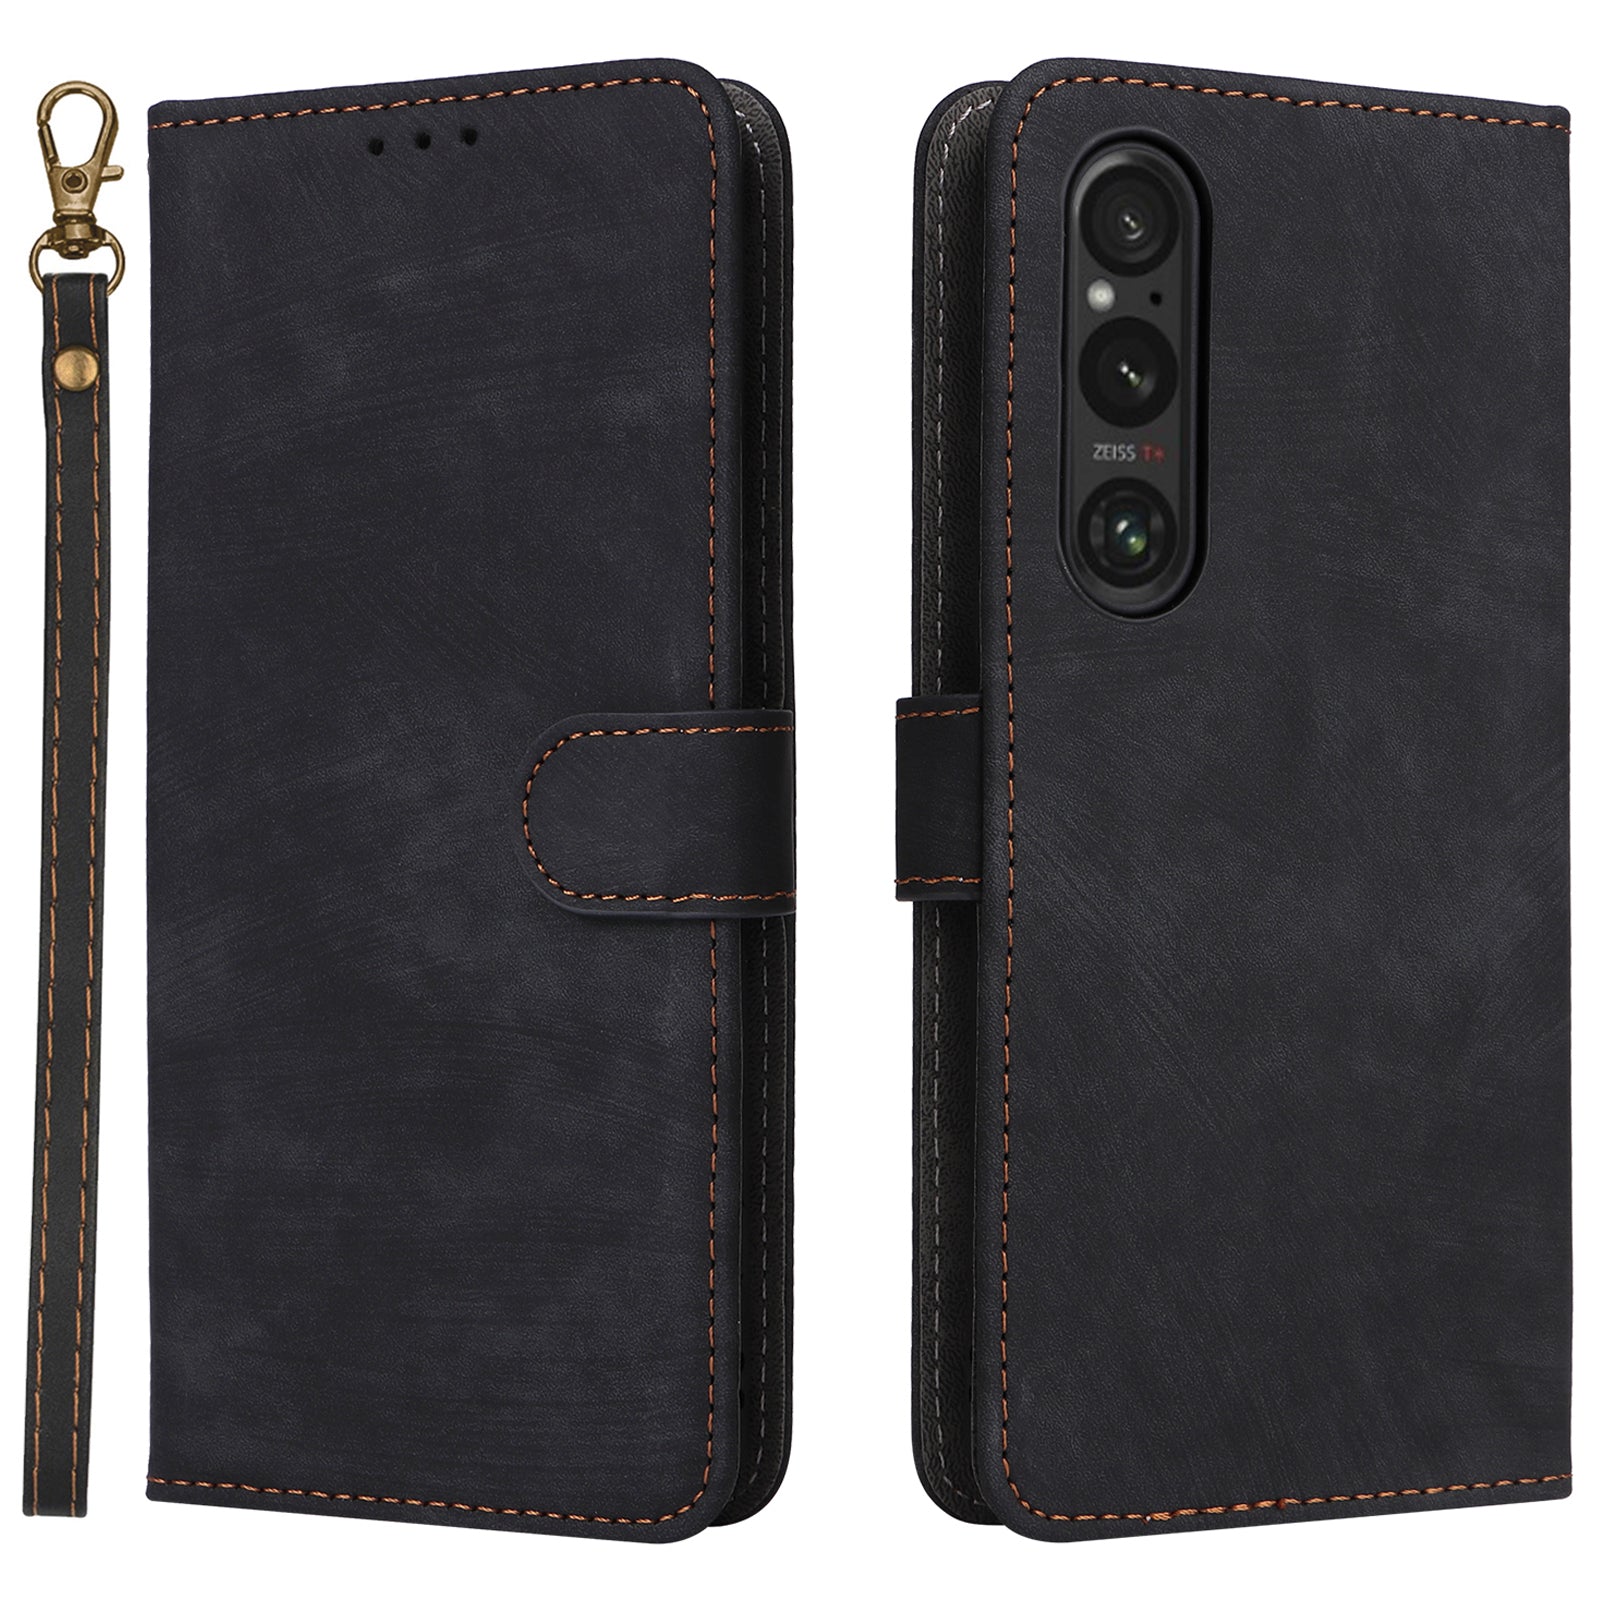 For Sony Xperia 1 VI Leather Case RFID Blocking Wallet Cover with Wrist Strap - Black